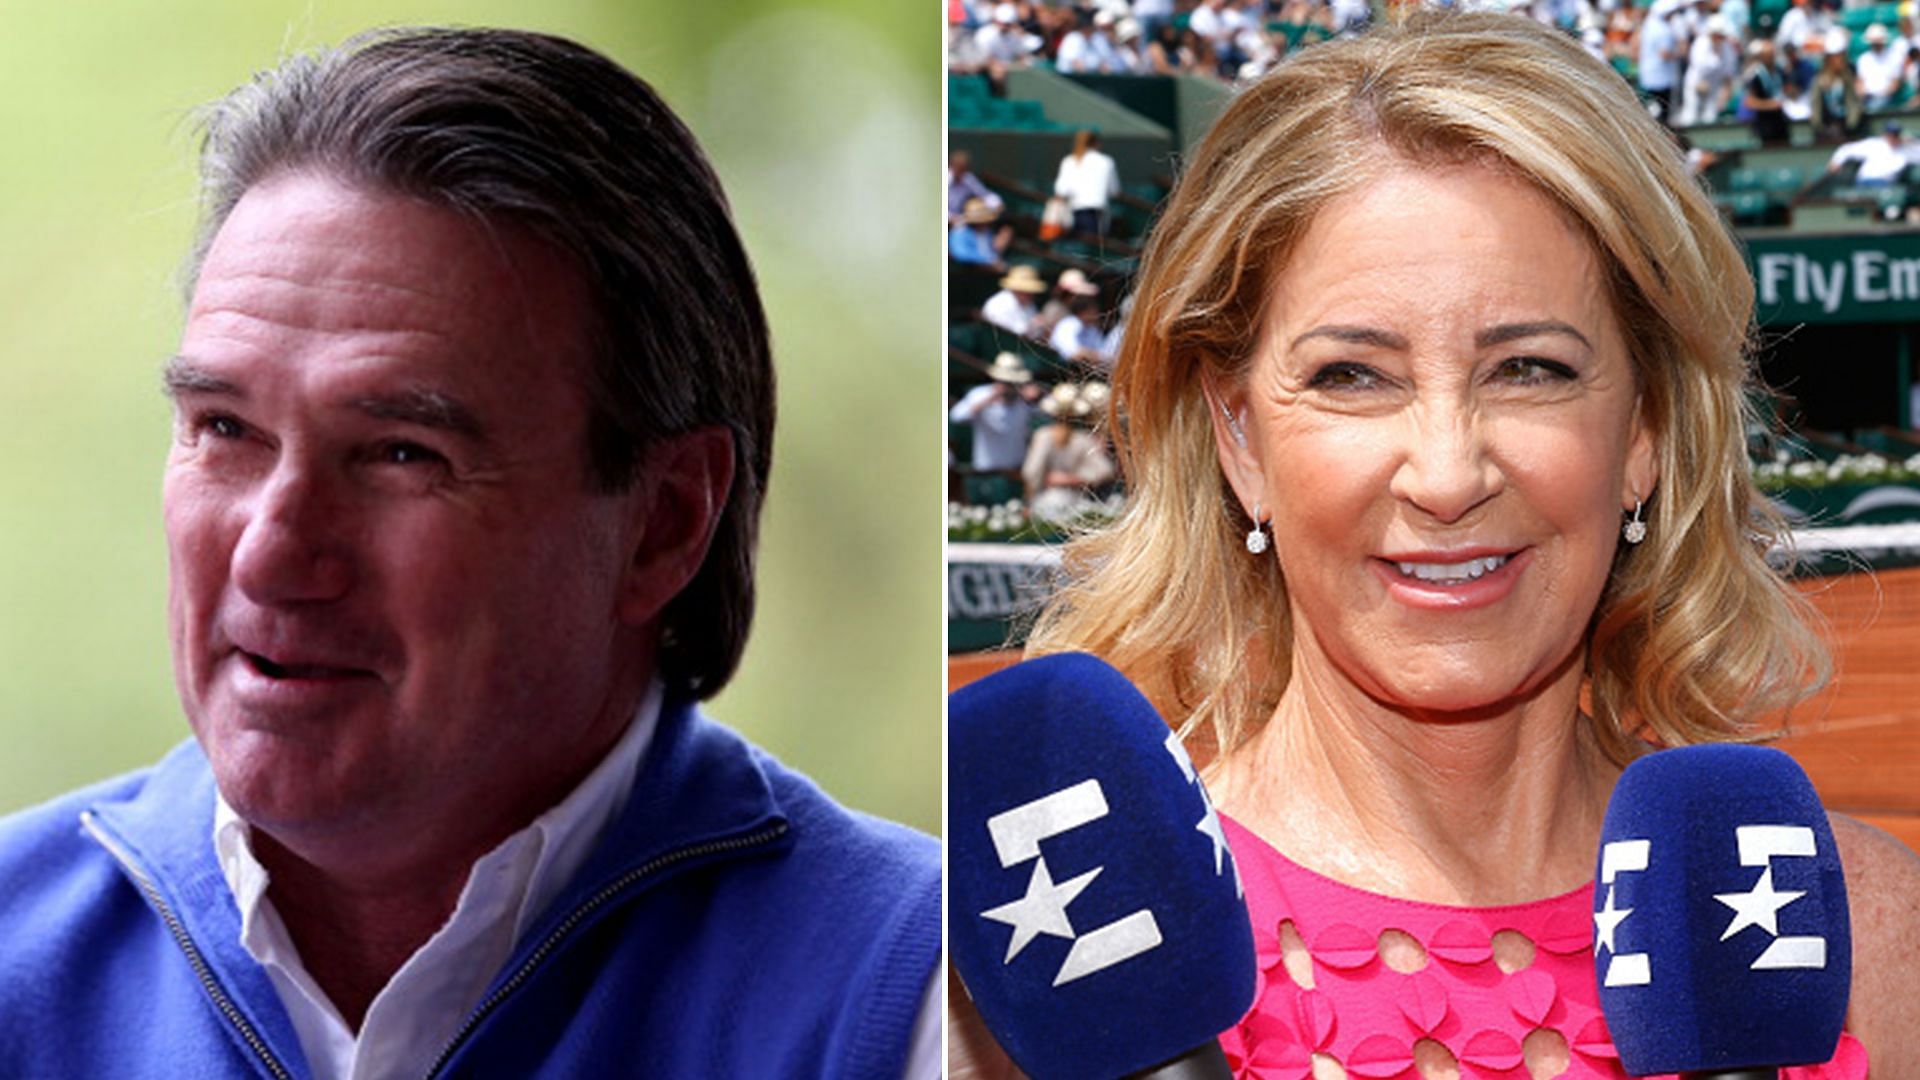 Jimmy Connors and Chris Evert were a notable tennis couple whose relationship didn